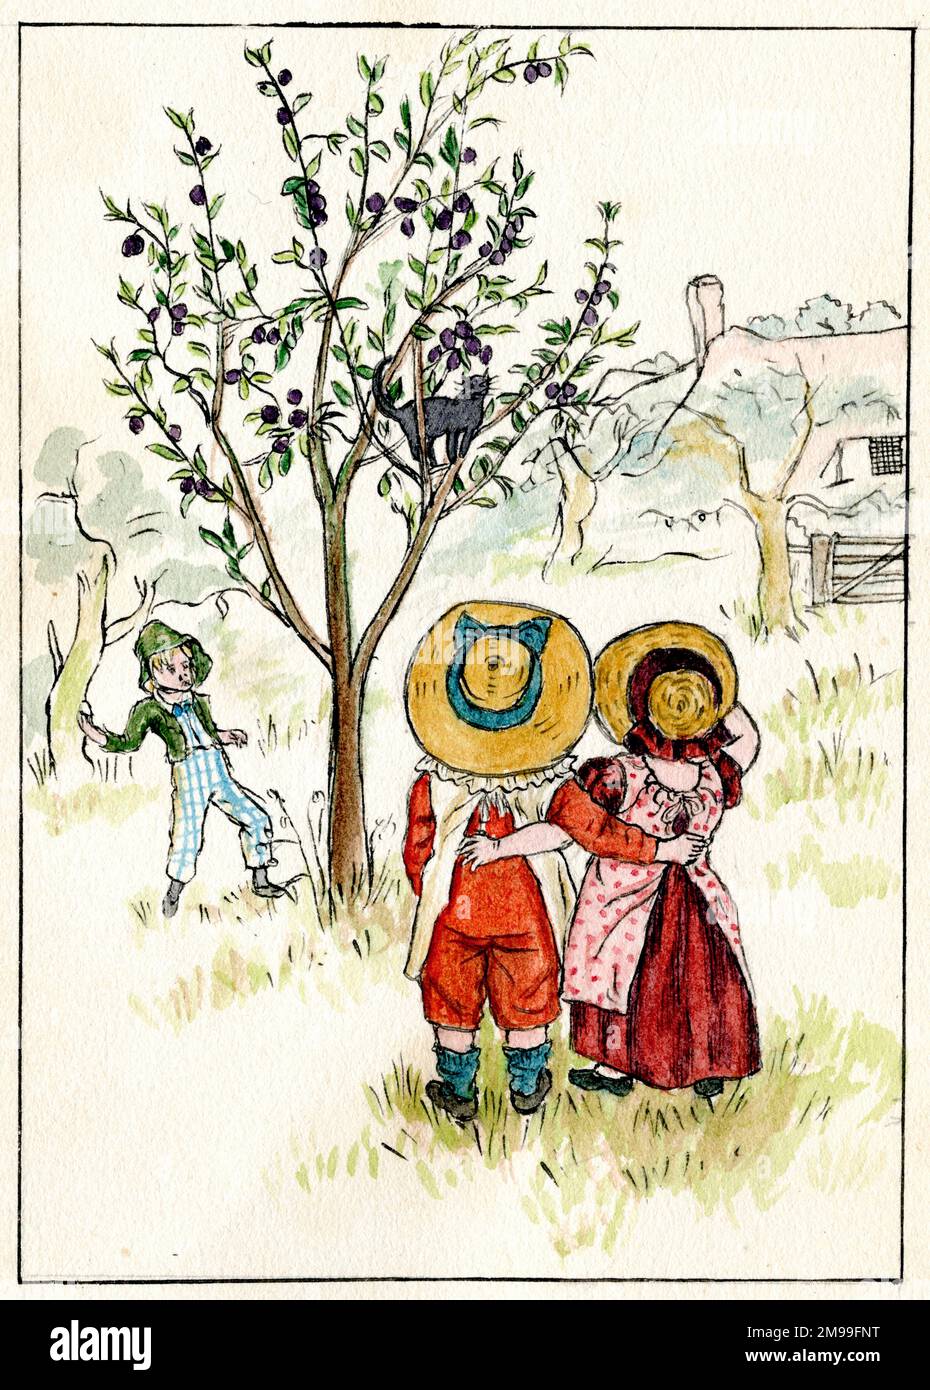 Artwork by Florence Auerbach, children in a garden, with a cat in a tree. Stock Photo